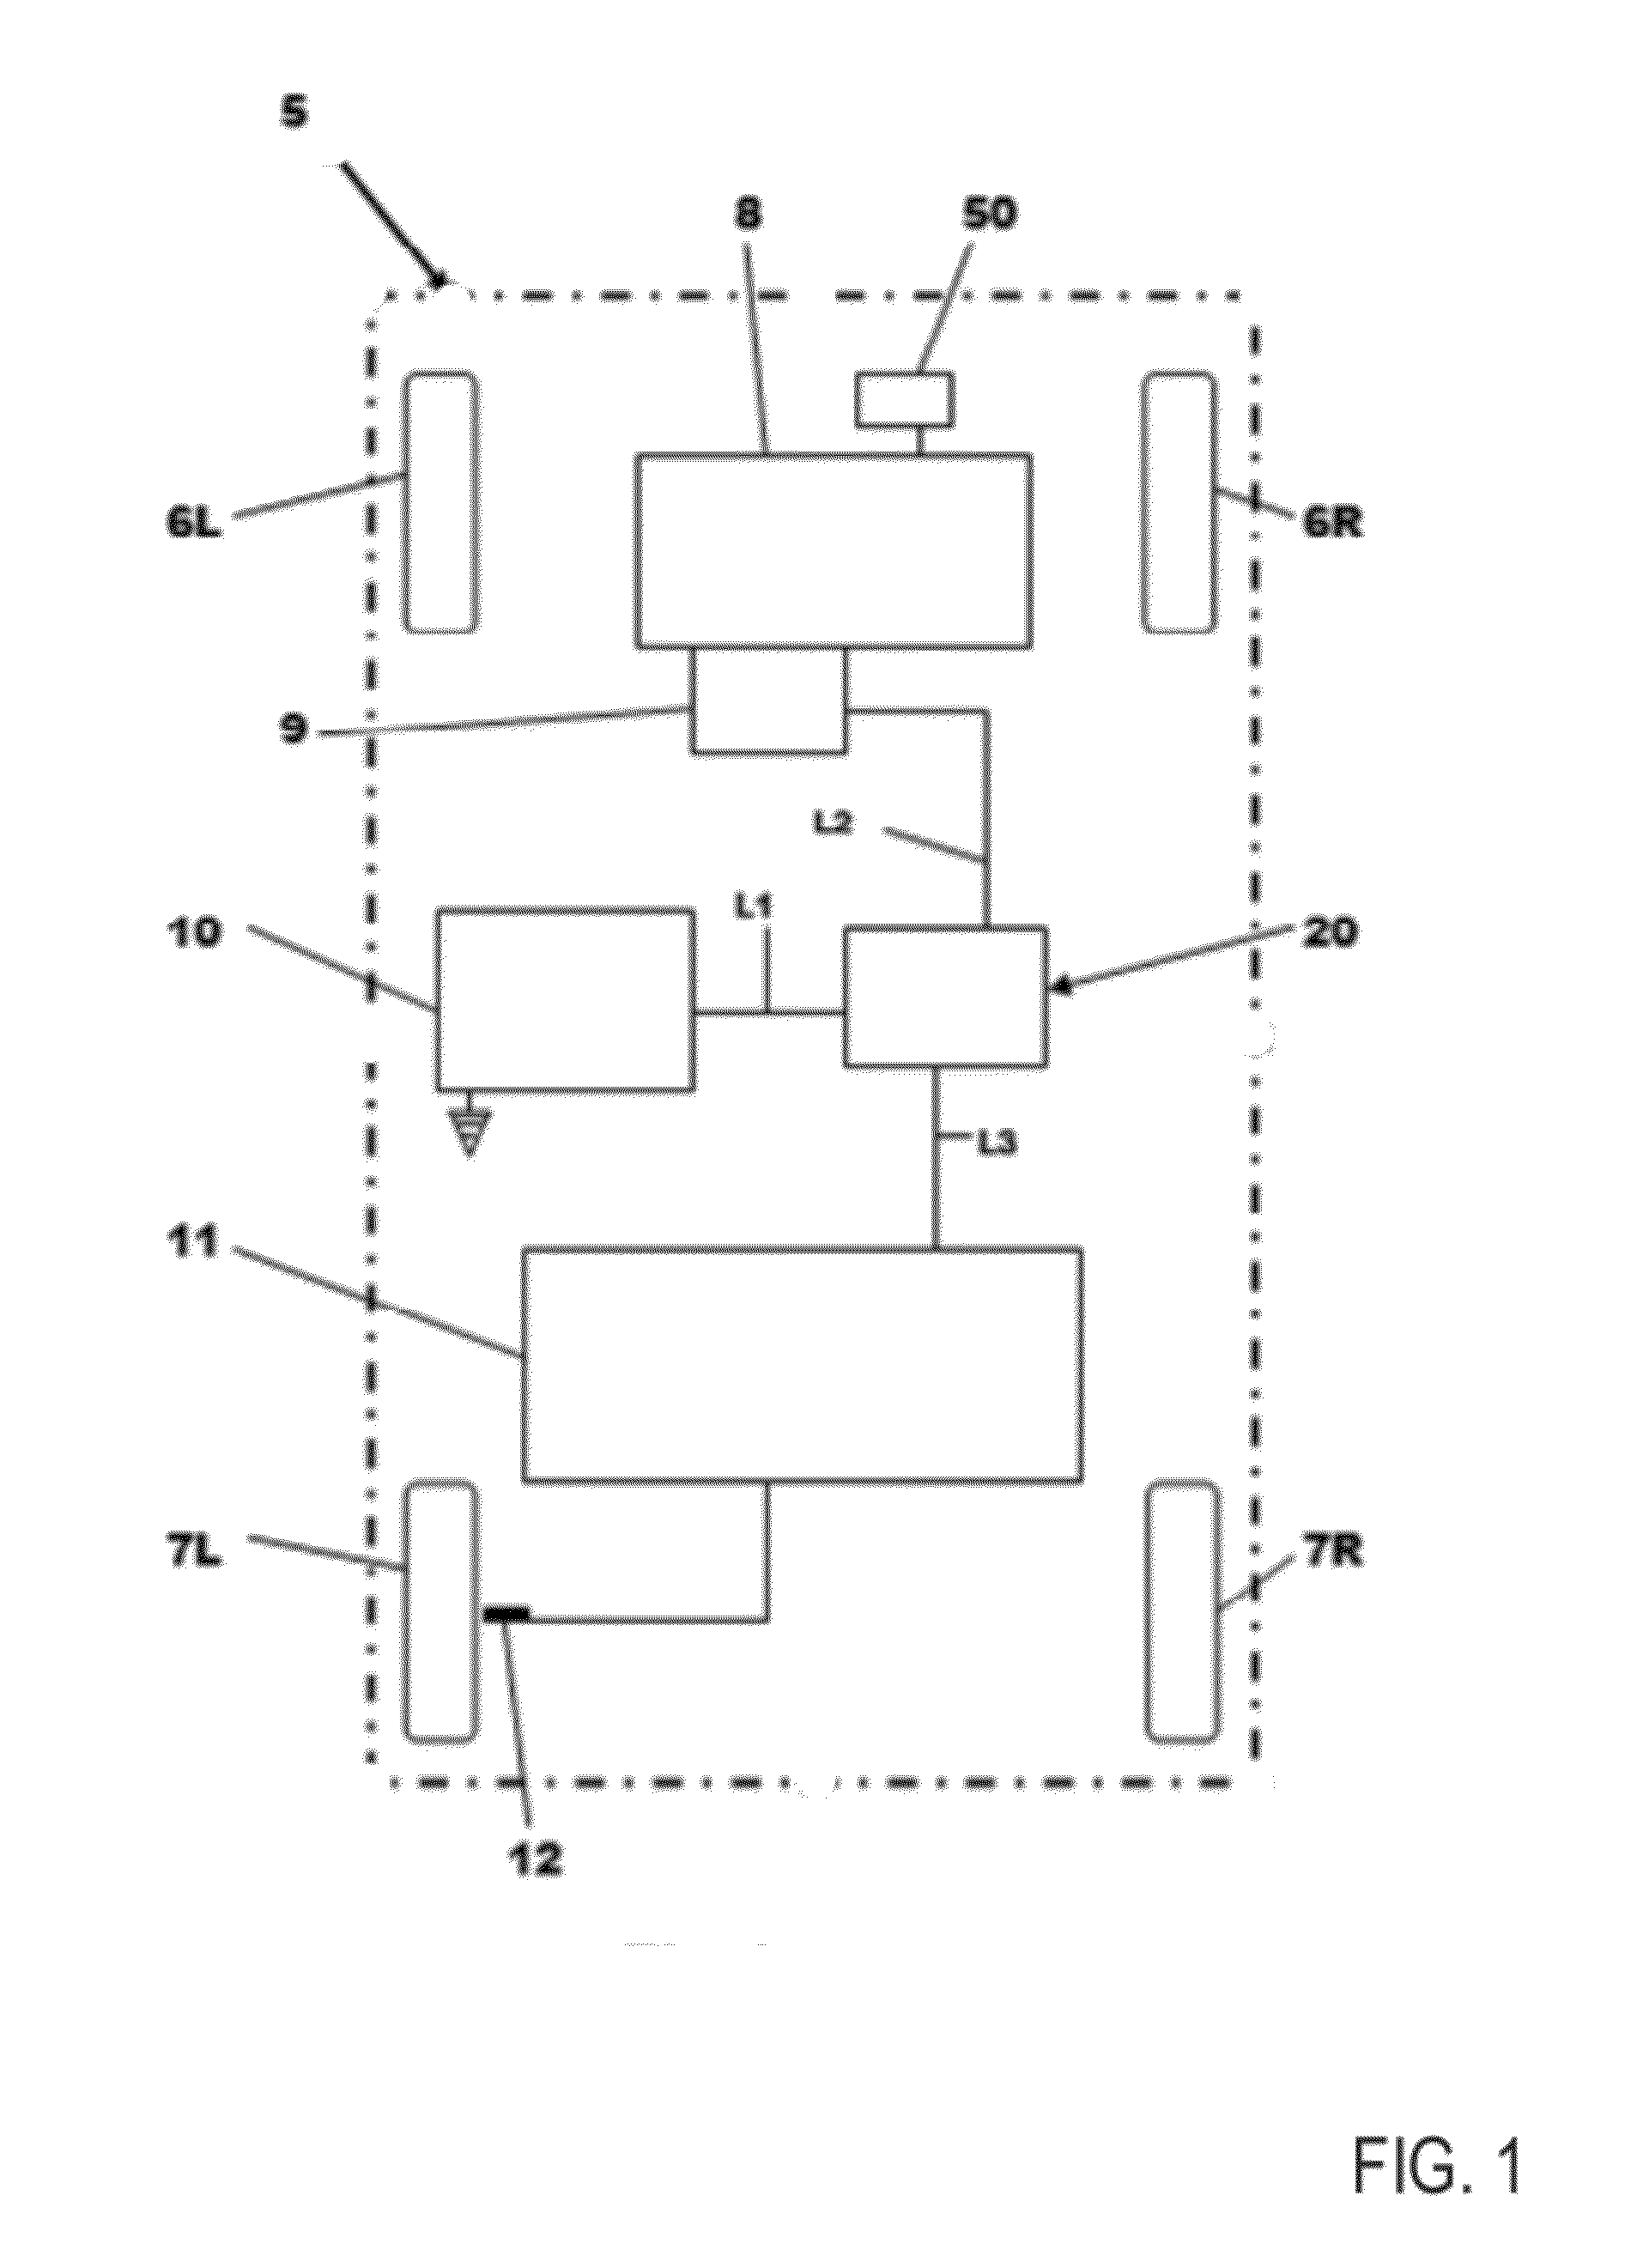 Method and apparatus for limiting in-rush current to a starter motor of a vehicle